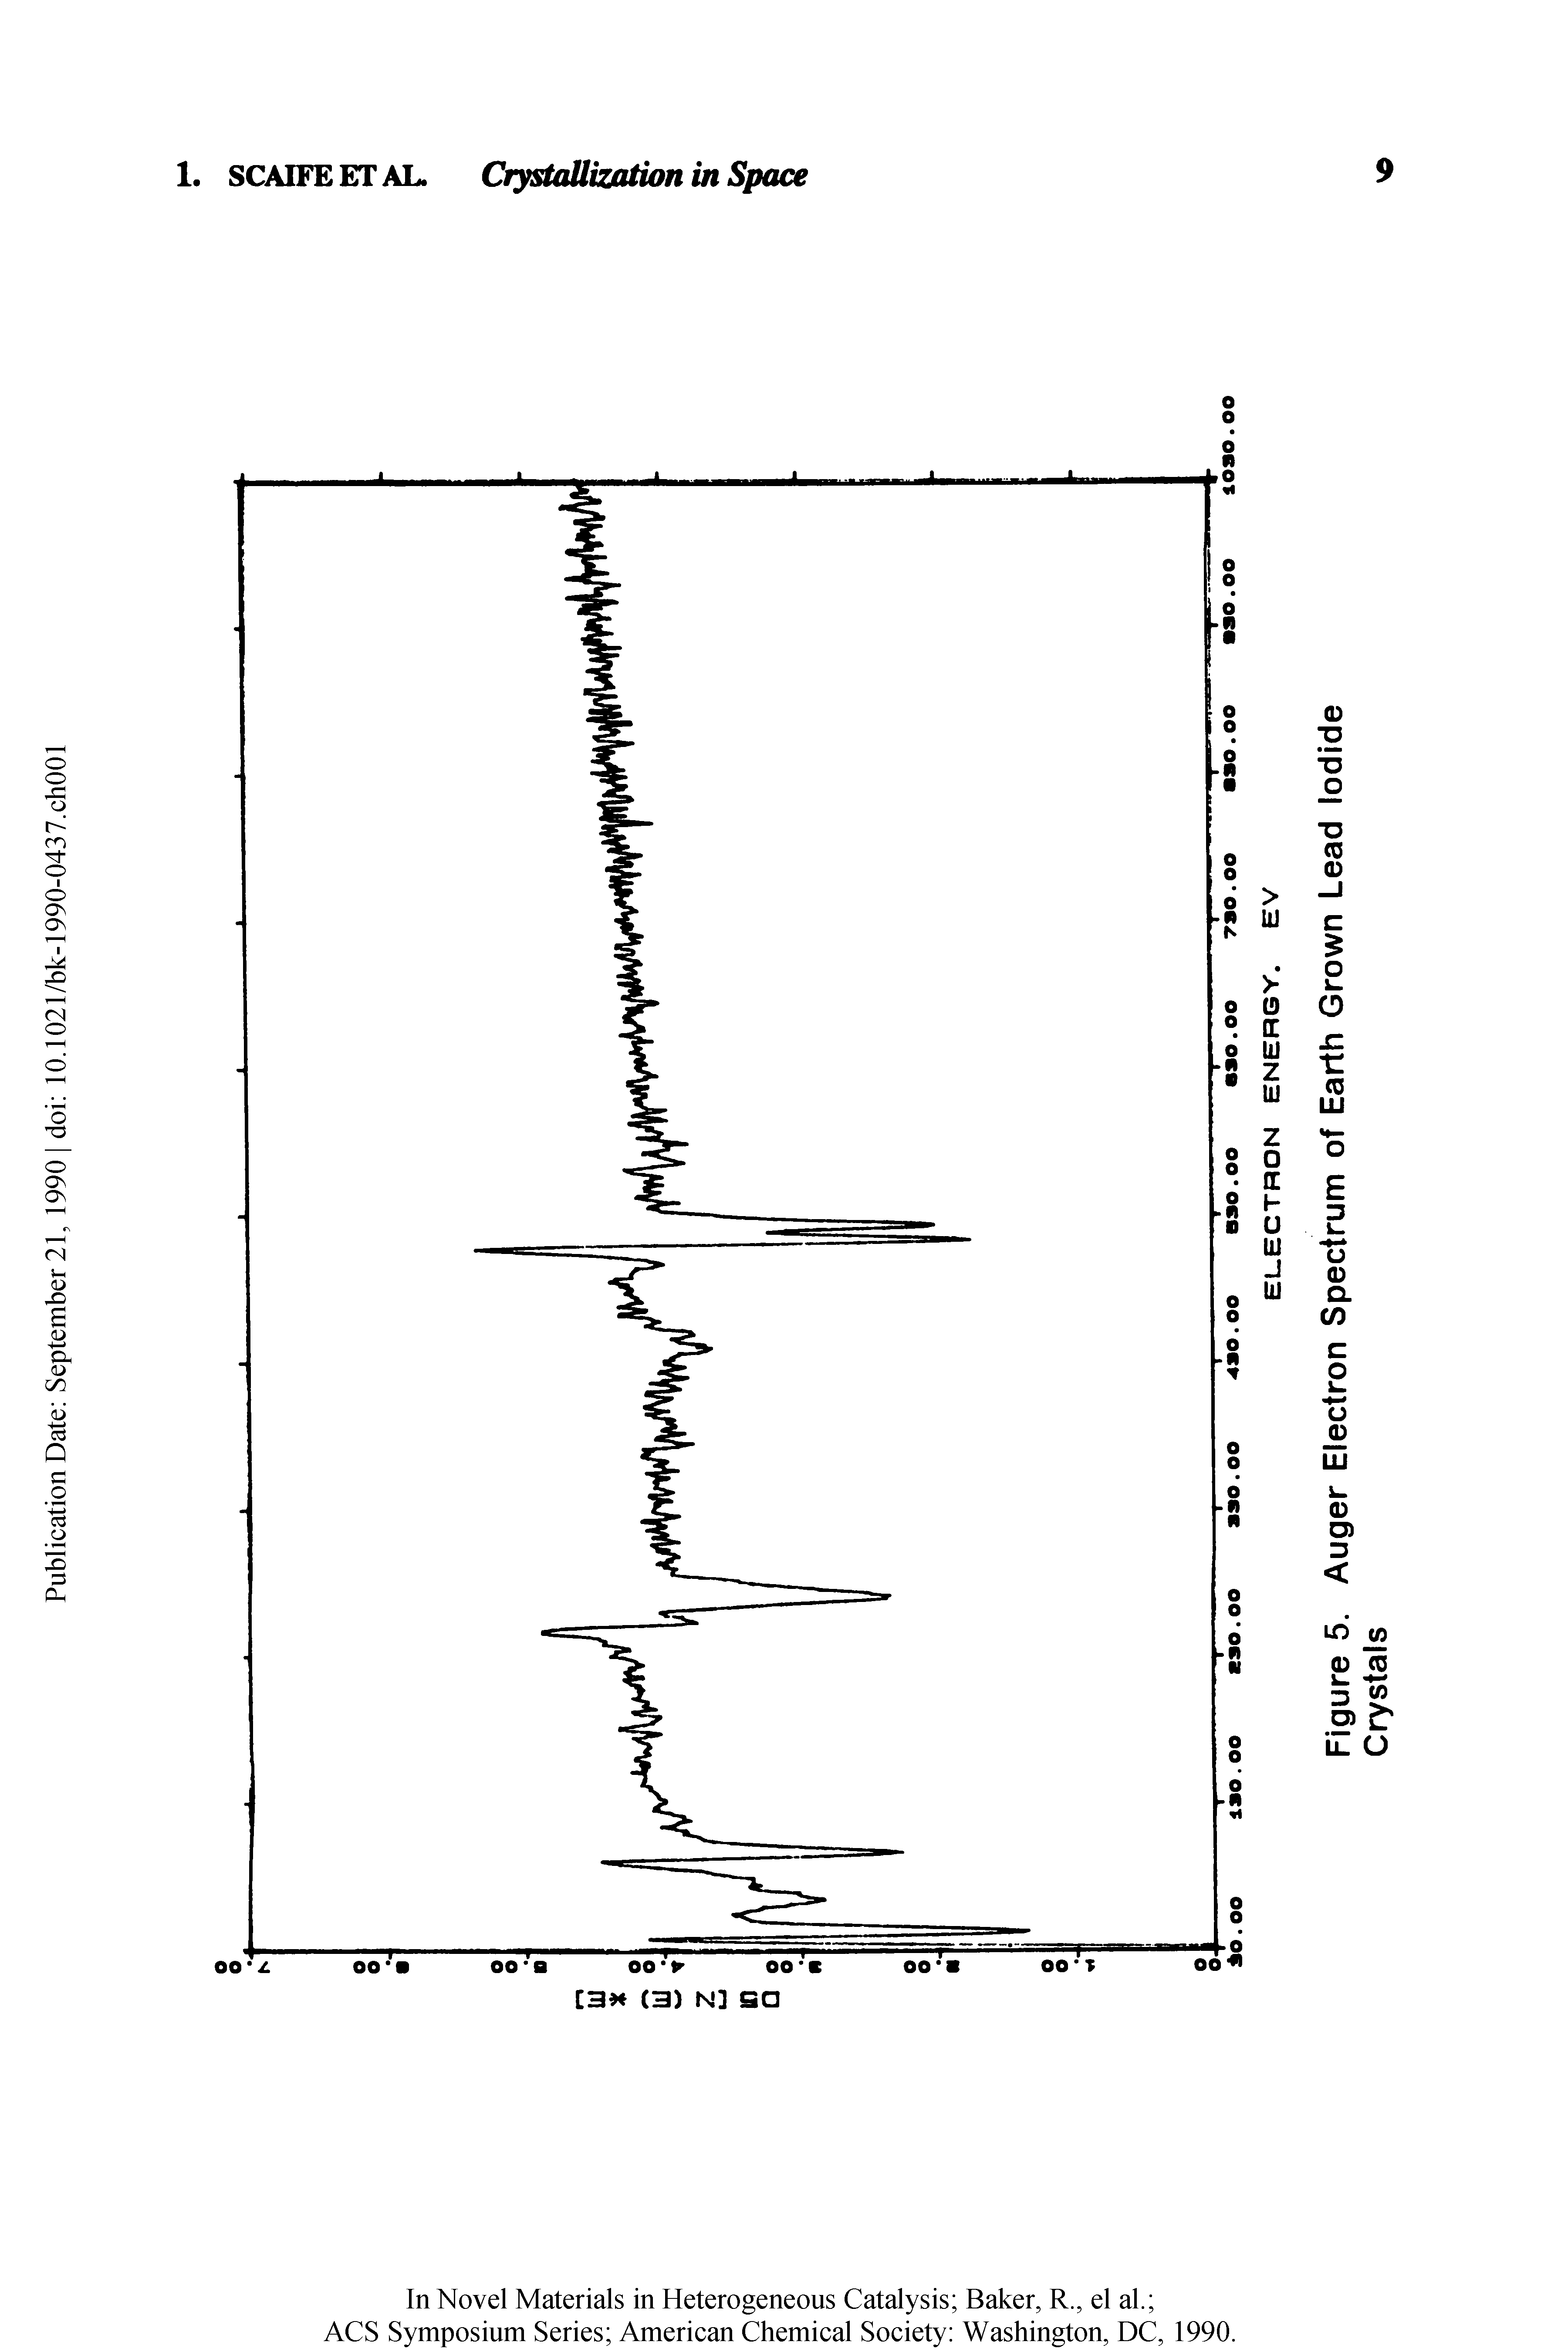 Figure 5. Auger Electron Spectrum of Earth Grown Lead Iodide Crystals...